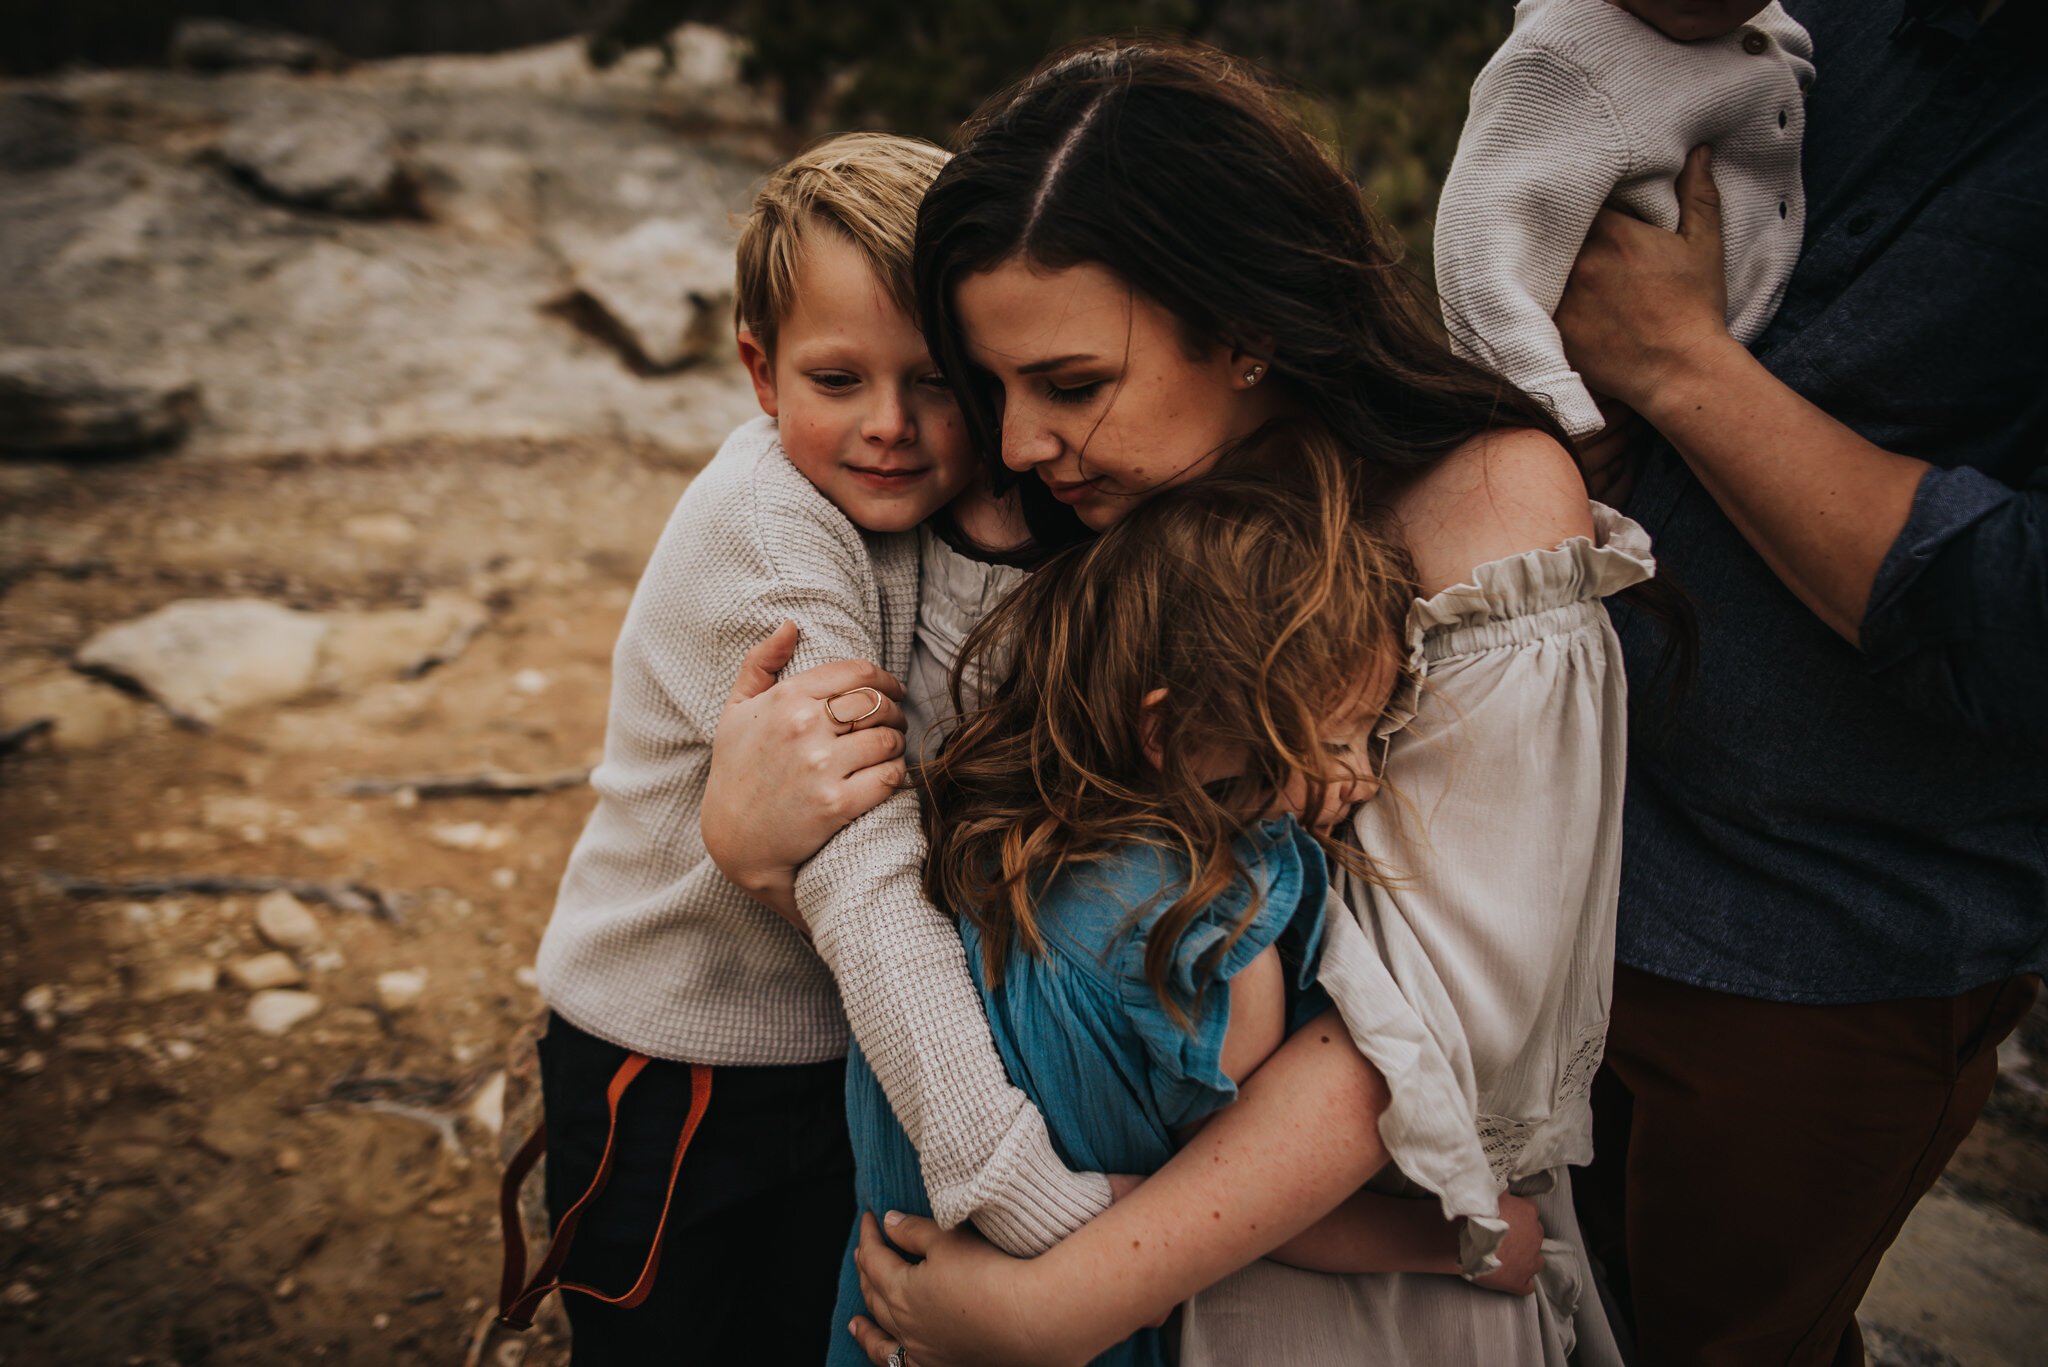 Miller+Family+Session+Mentorship+Colorado+Springs+Colorado+Sunset+Ute+Valley+Park+Mountains+Fields+Mom+Dad+Son+Daughter+Baby+Wild+Prairie+Photography-19-2020.jpeg